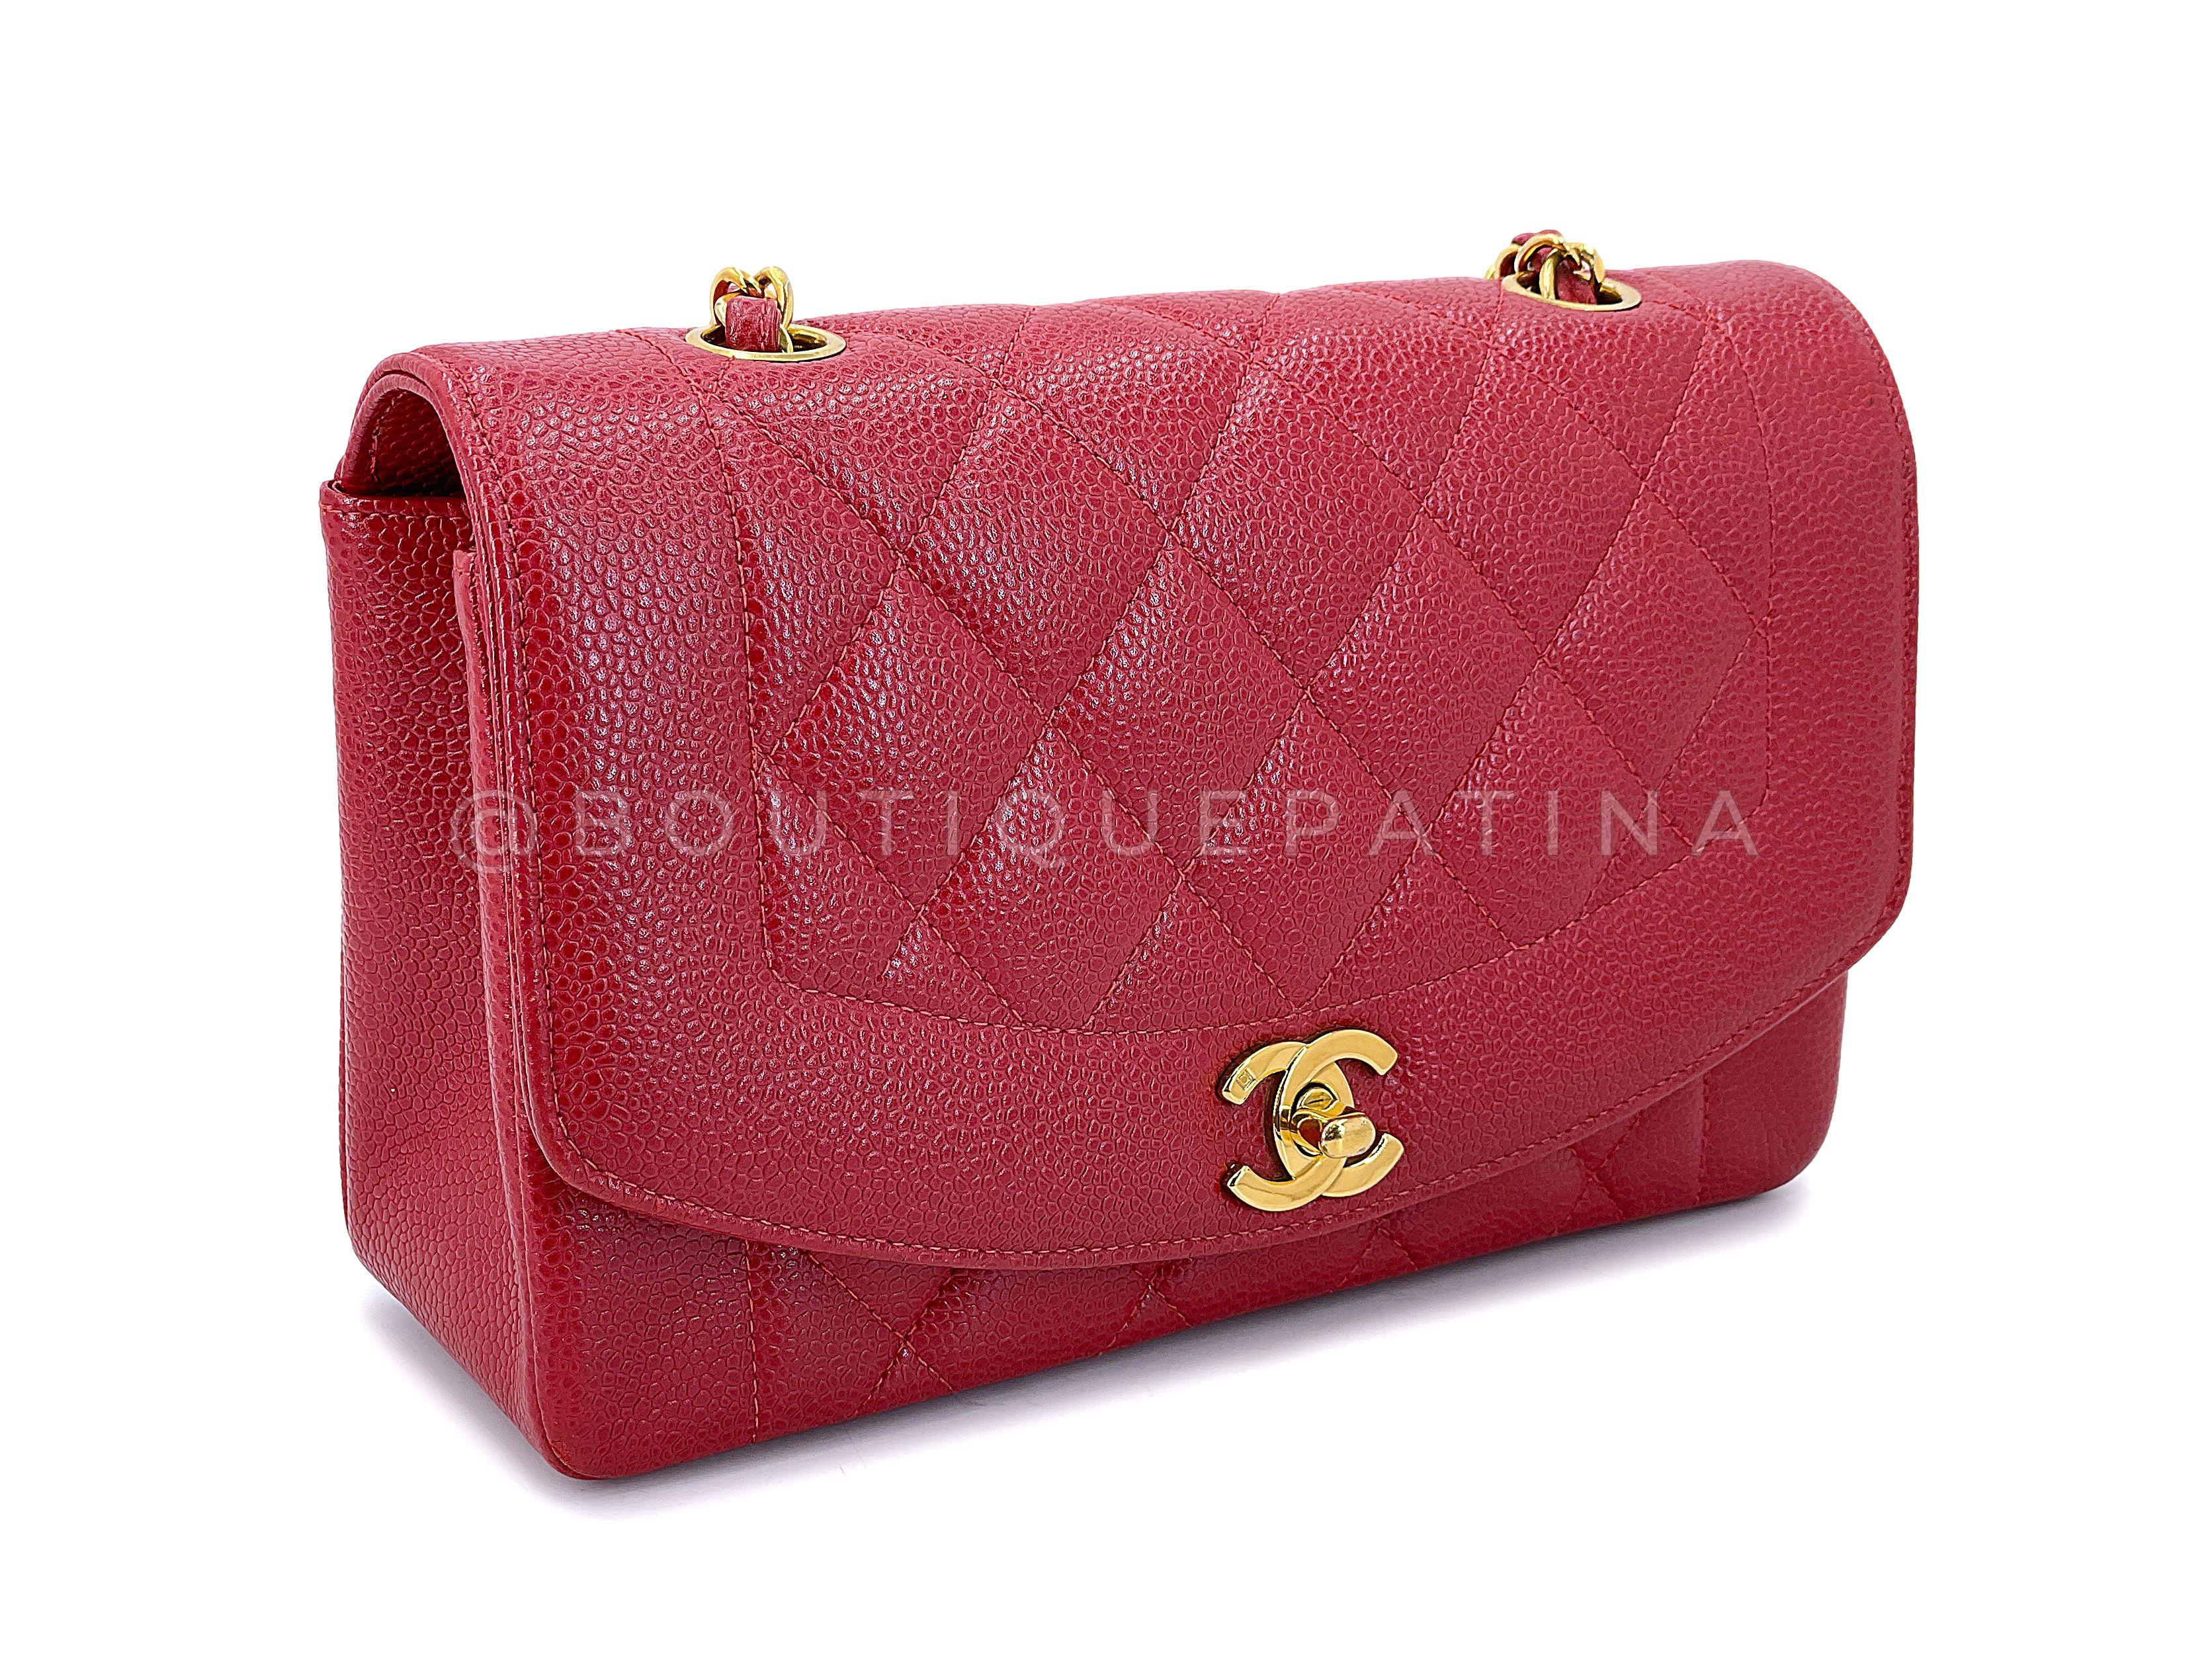 Chanel Vintage Red Caviar Small Diana Flap Bag 24k GHW 67655 In Excellent Condition For Sale In Costa Mesa, CA